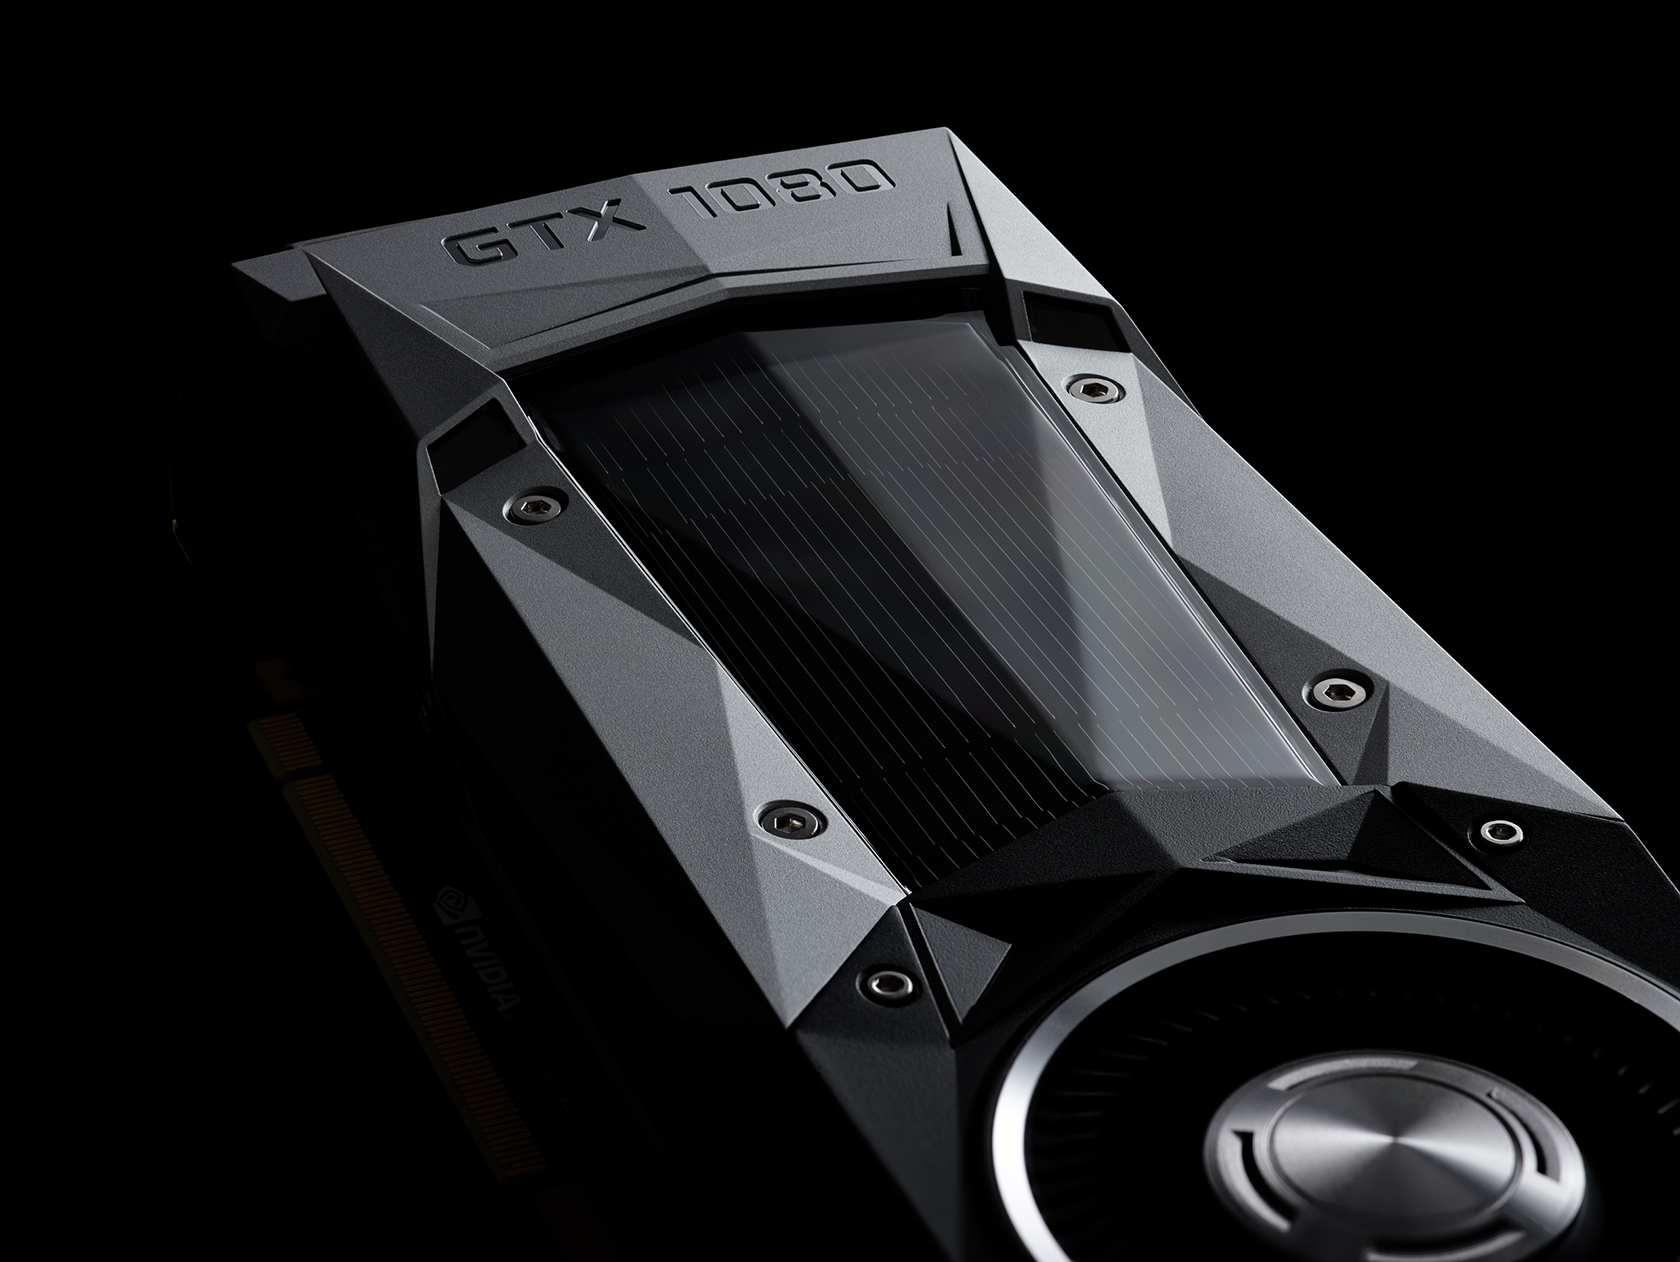 Media asset (photo, screenshot, or image in full size) related to contents posted at 3dfxzone.it | Image Name: news24229-NVIDIA-GeForce-GTX-1080_14.jpg